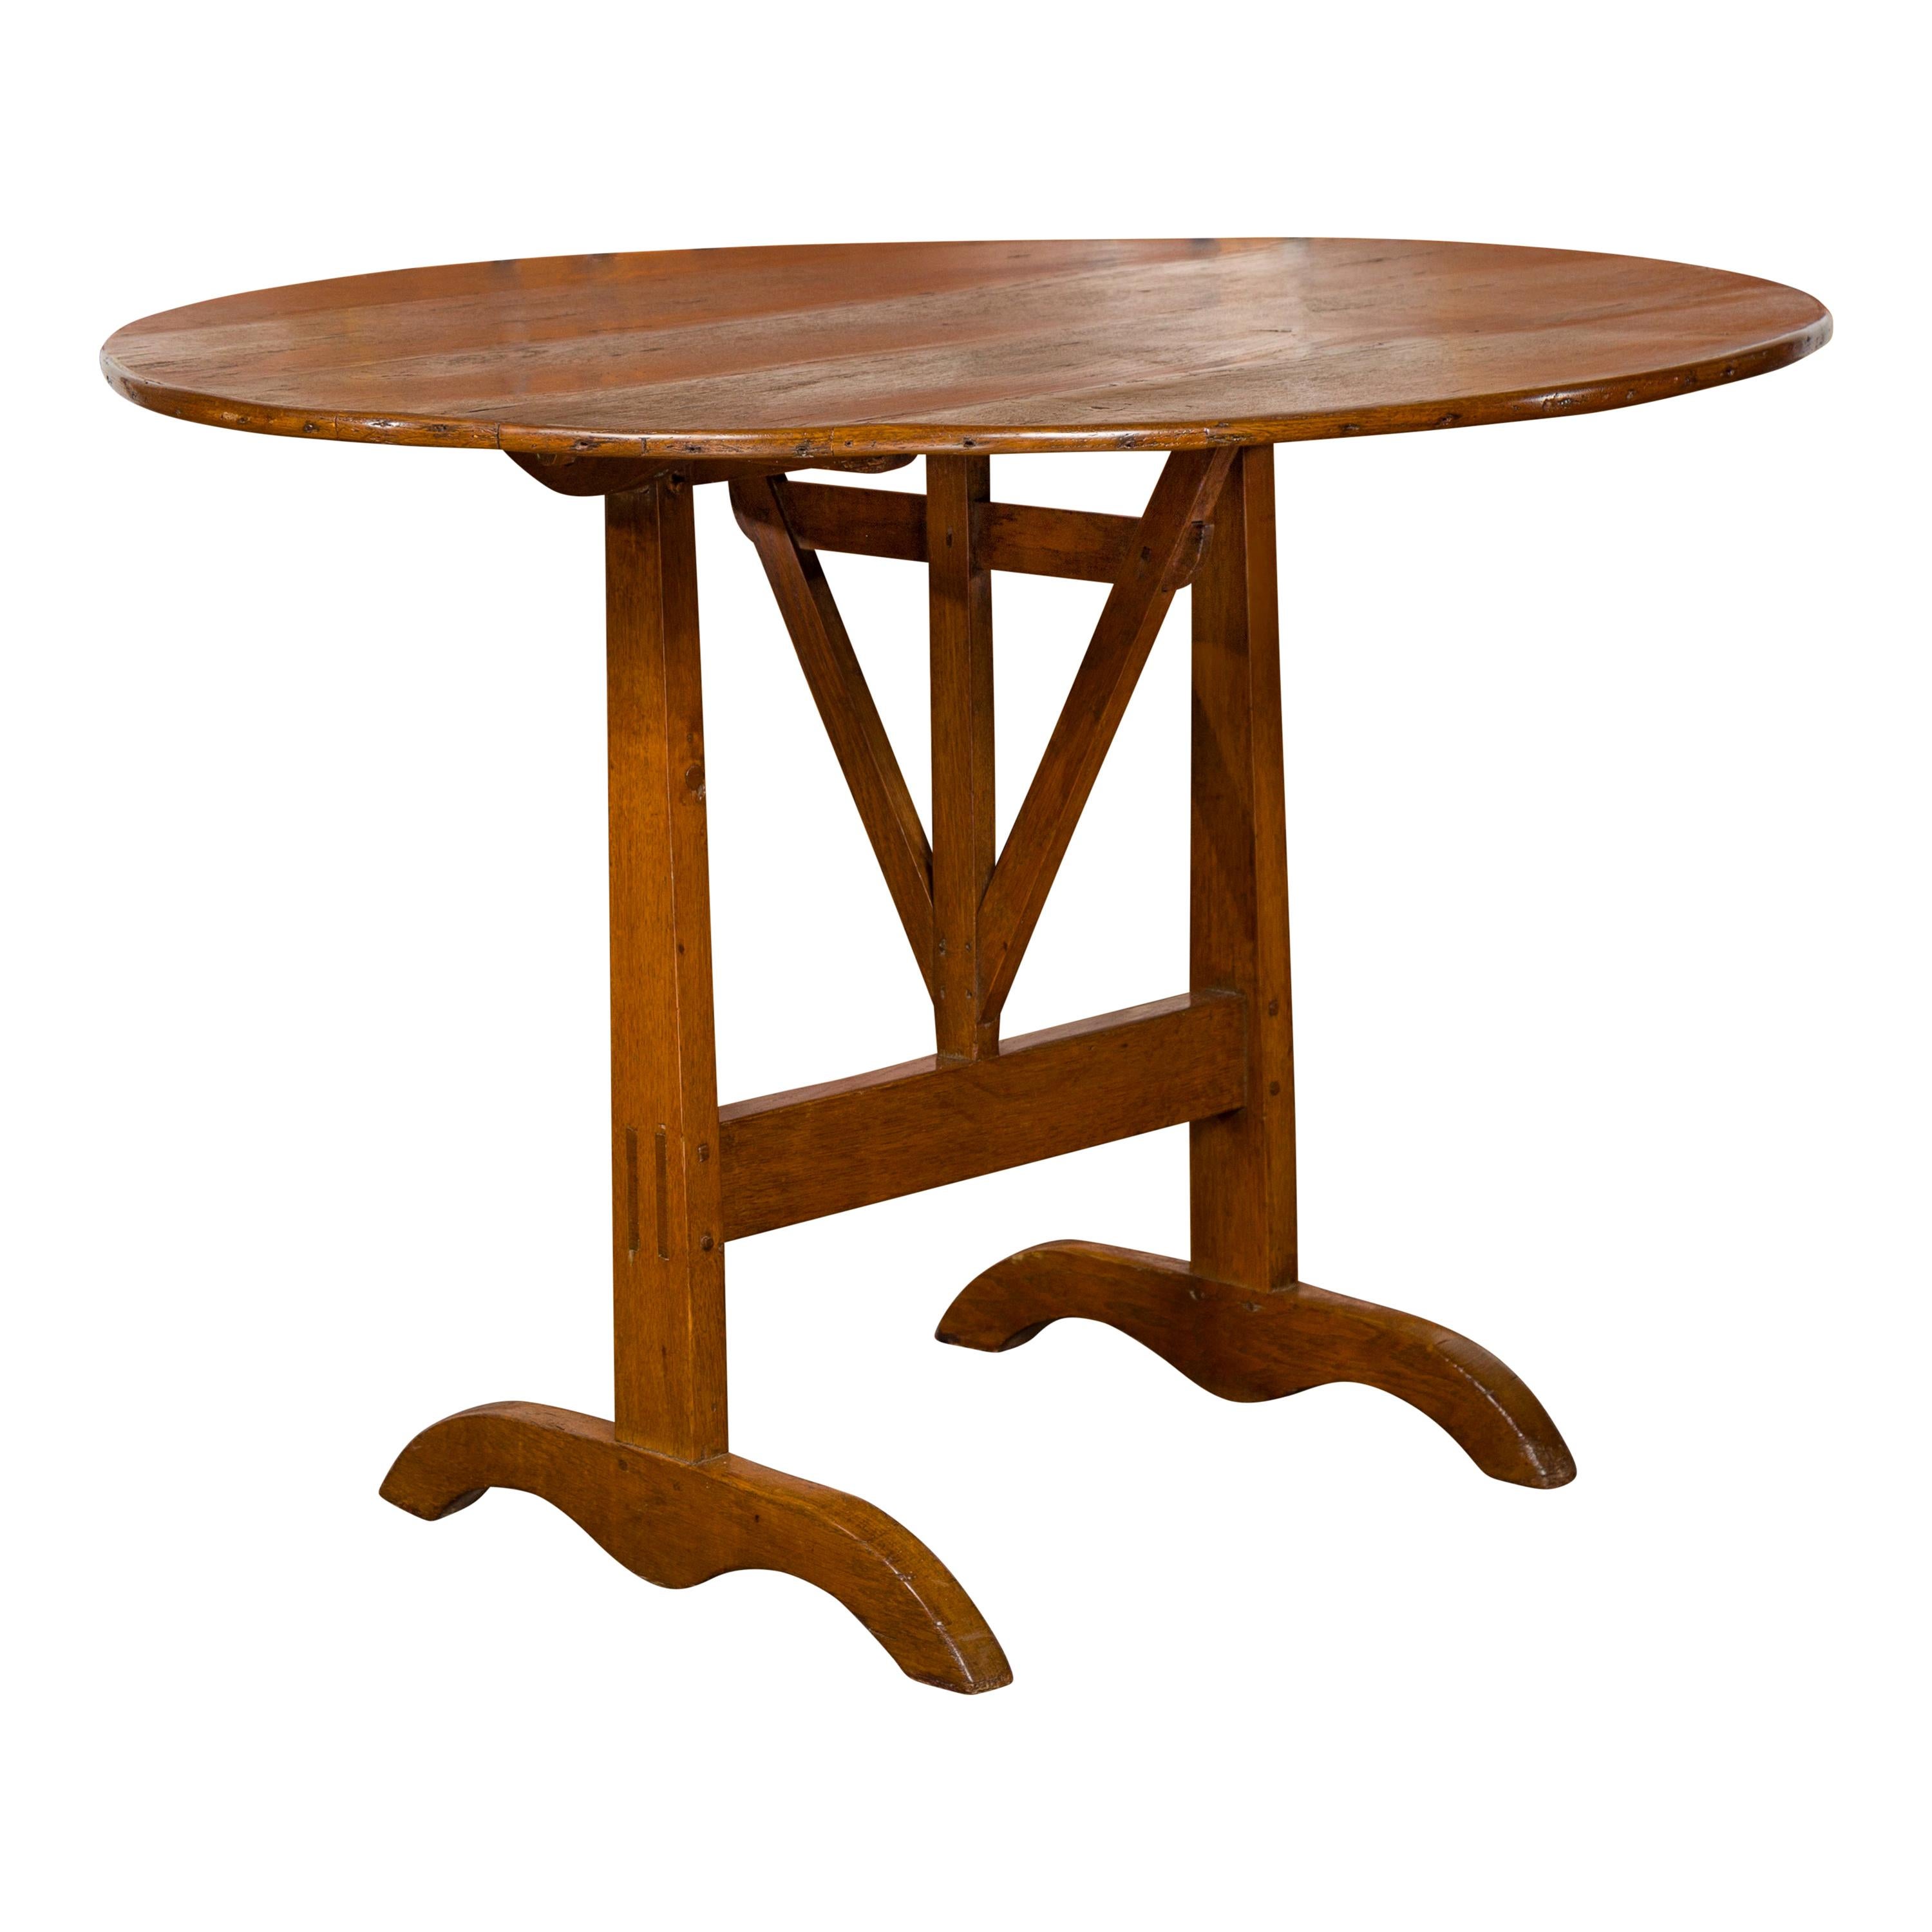 French 1880s Oak Wine Tasting Table with Round Tilt-Top and Trestle Base